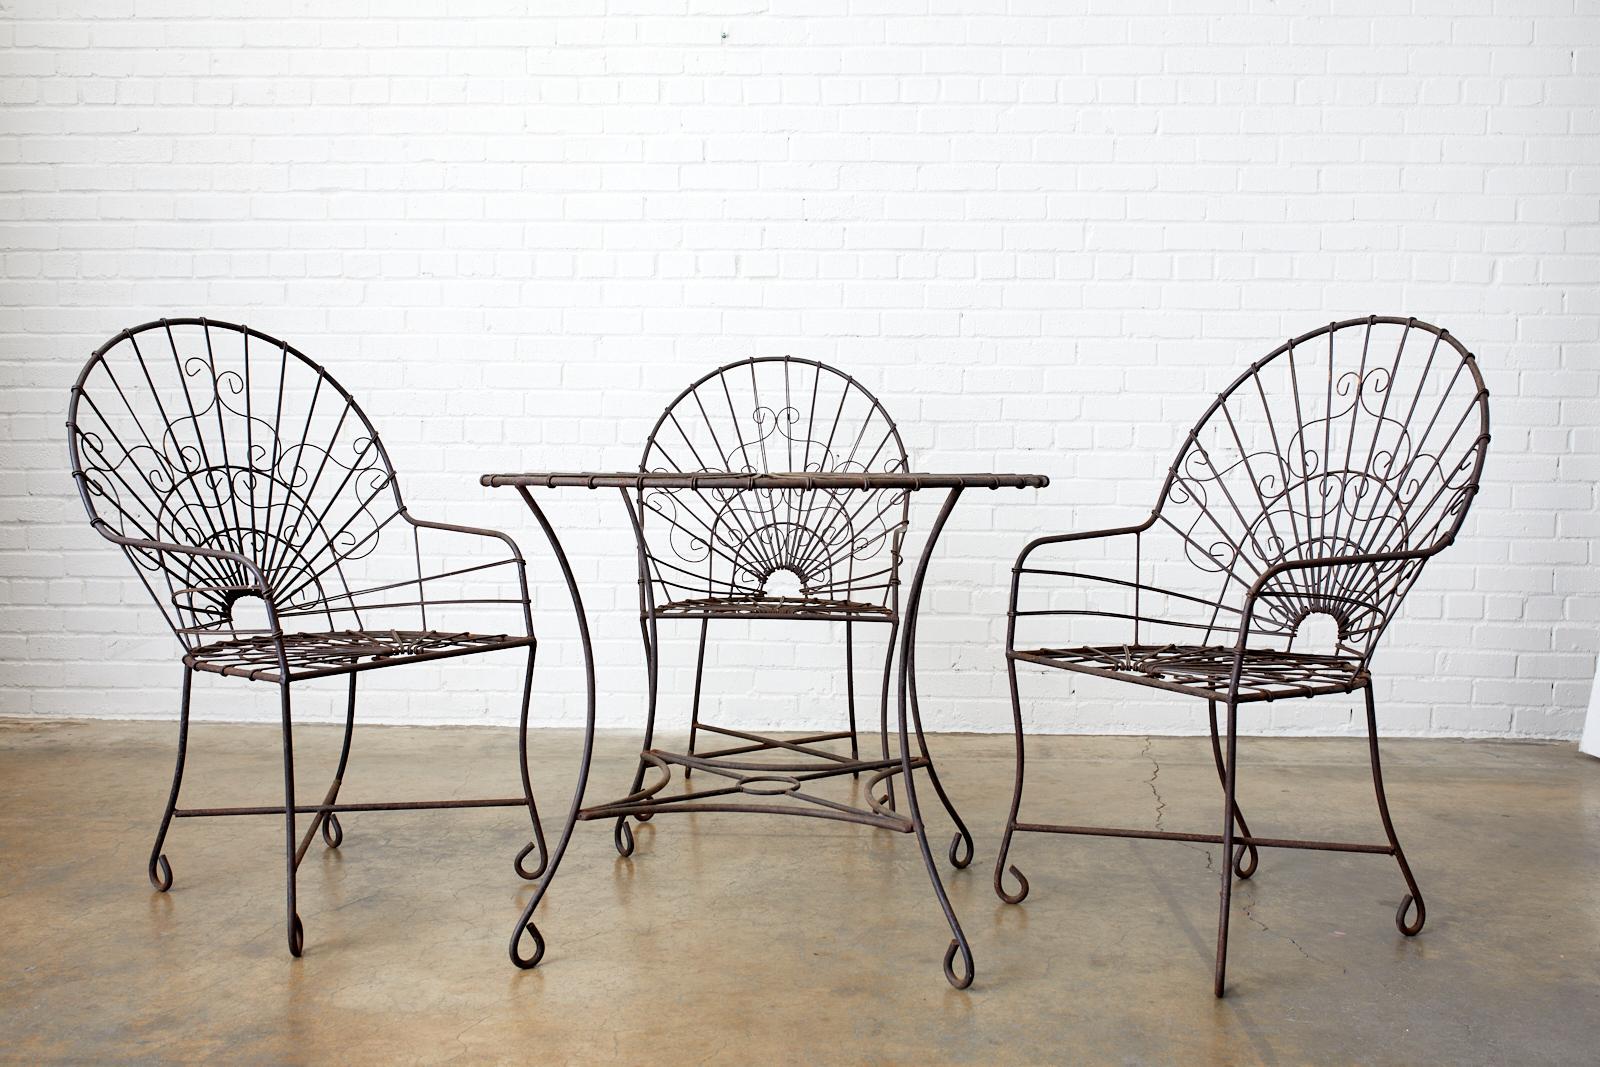 Hand-Crafted Set of Four French Art Nouveau Iron Garden Chairs